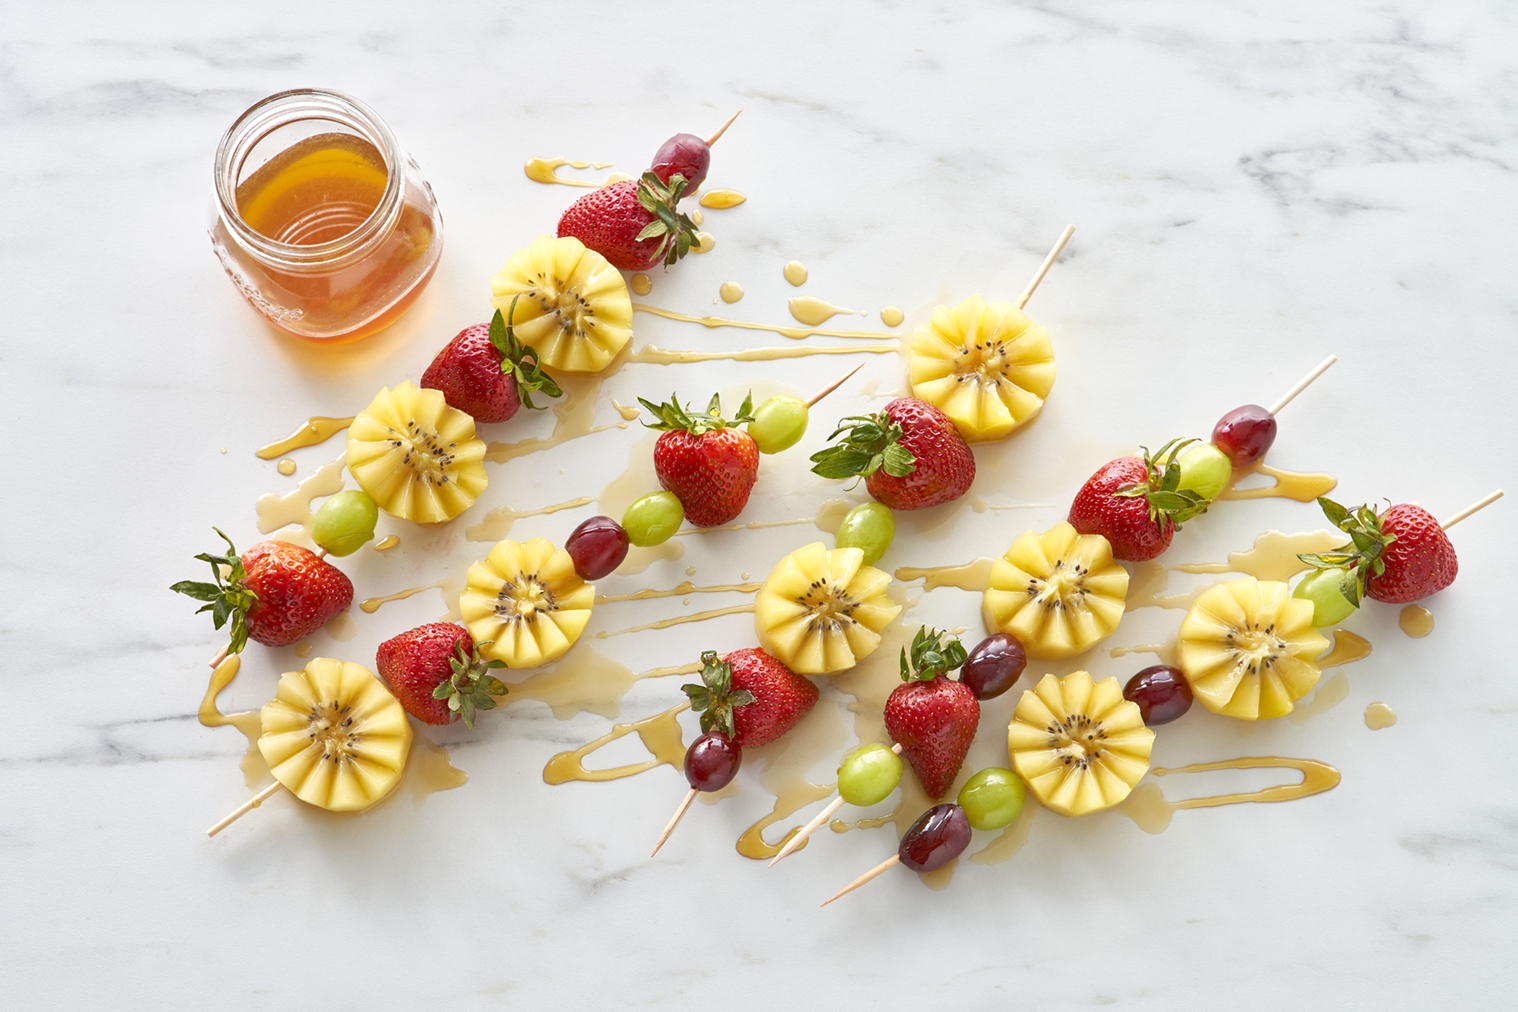 Zespri SunGold kiwi, strawberry and grape skewers with honey drizzle